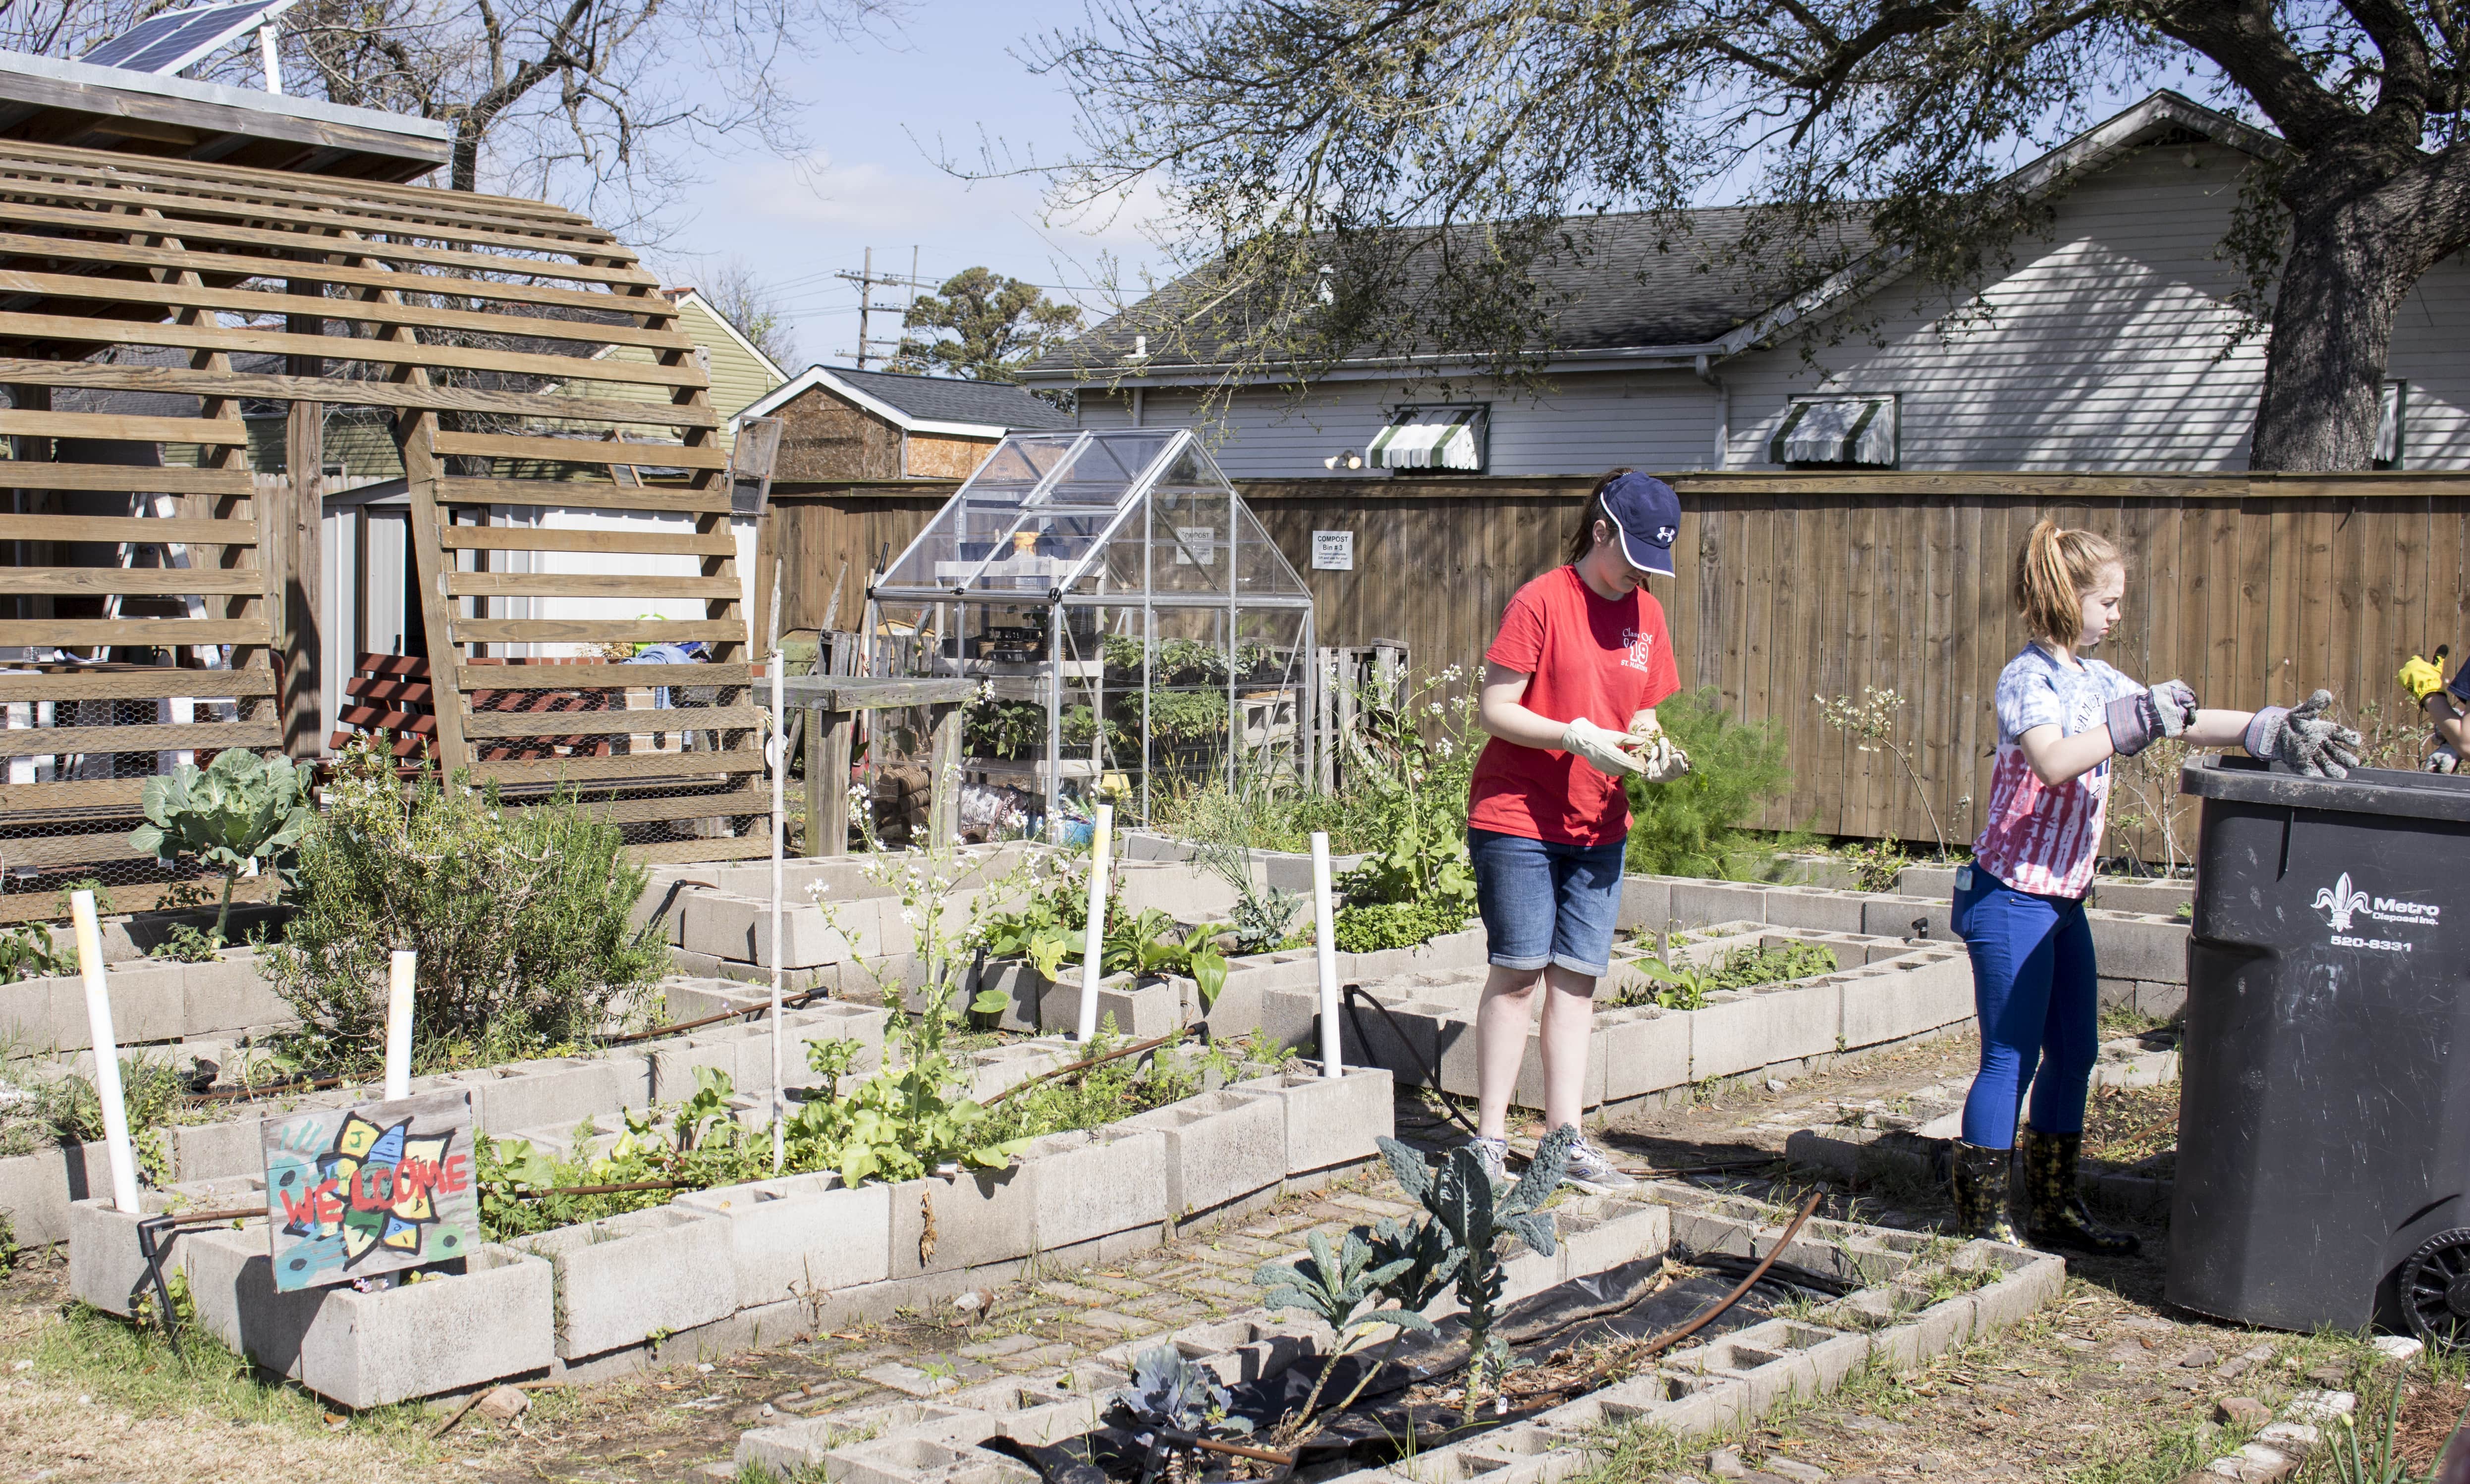 One of two community gardens established by the Backyard Gardeners Network in the Lower Ninth Ward of New Orleans since Hurricane Katrina. They provide a place for the community to strengthen its tradition of urban gardening in addition to education.